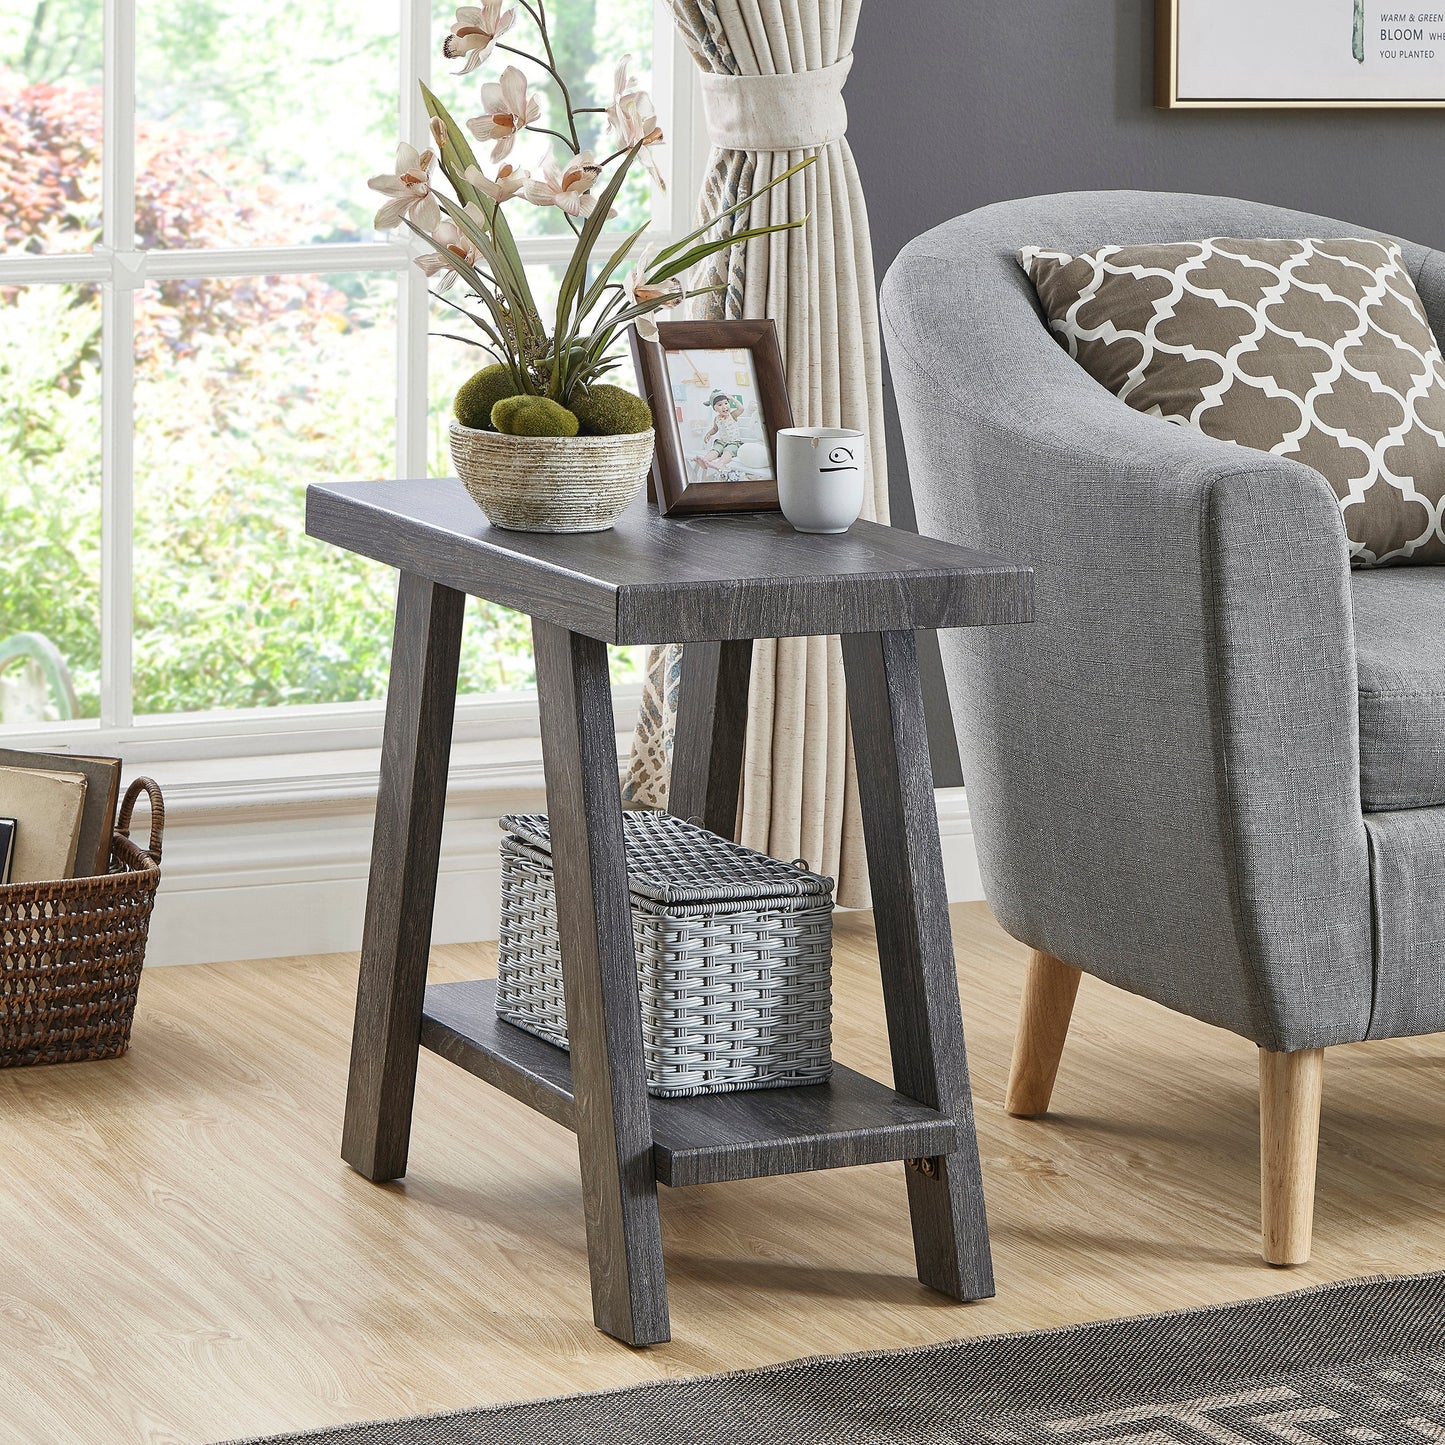 Athens Contemporary Wood Shelf Side Table in Gray Finish